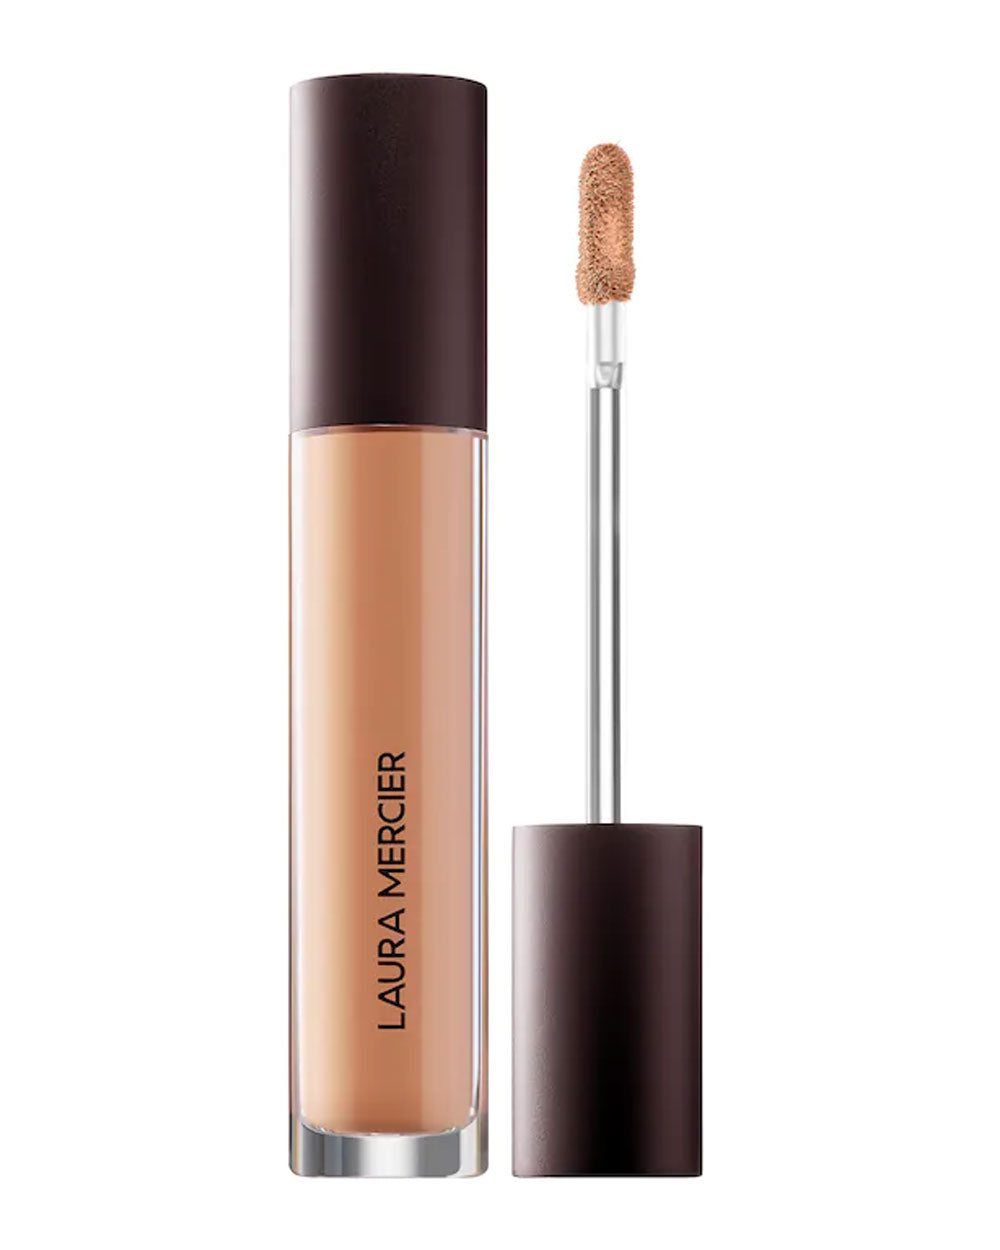 Flawless Fusion Concealer in 4C